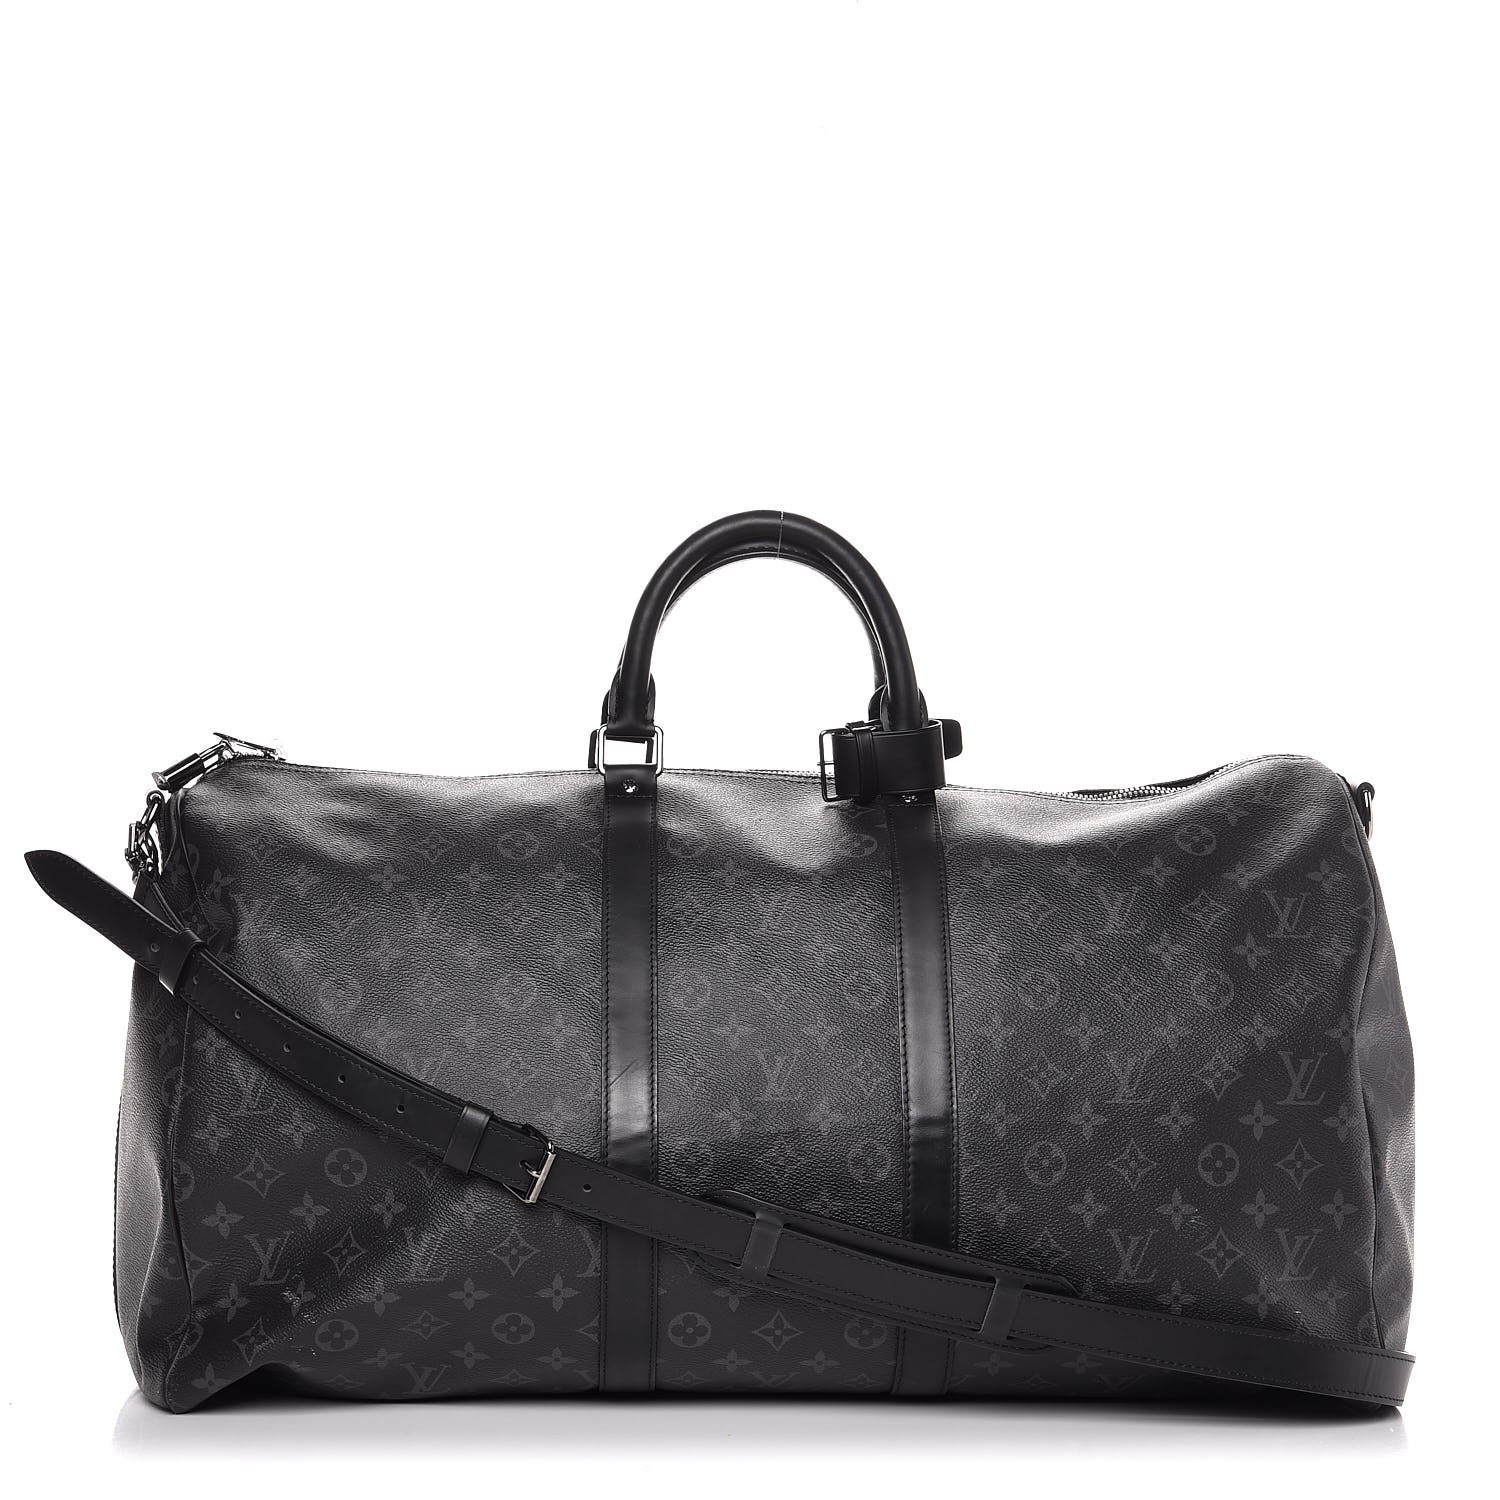 Louis Vuitton ECLIPSE Keepall Bandouliere (Review + Unboxing +